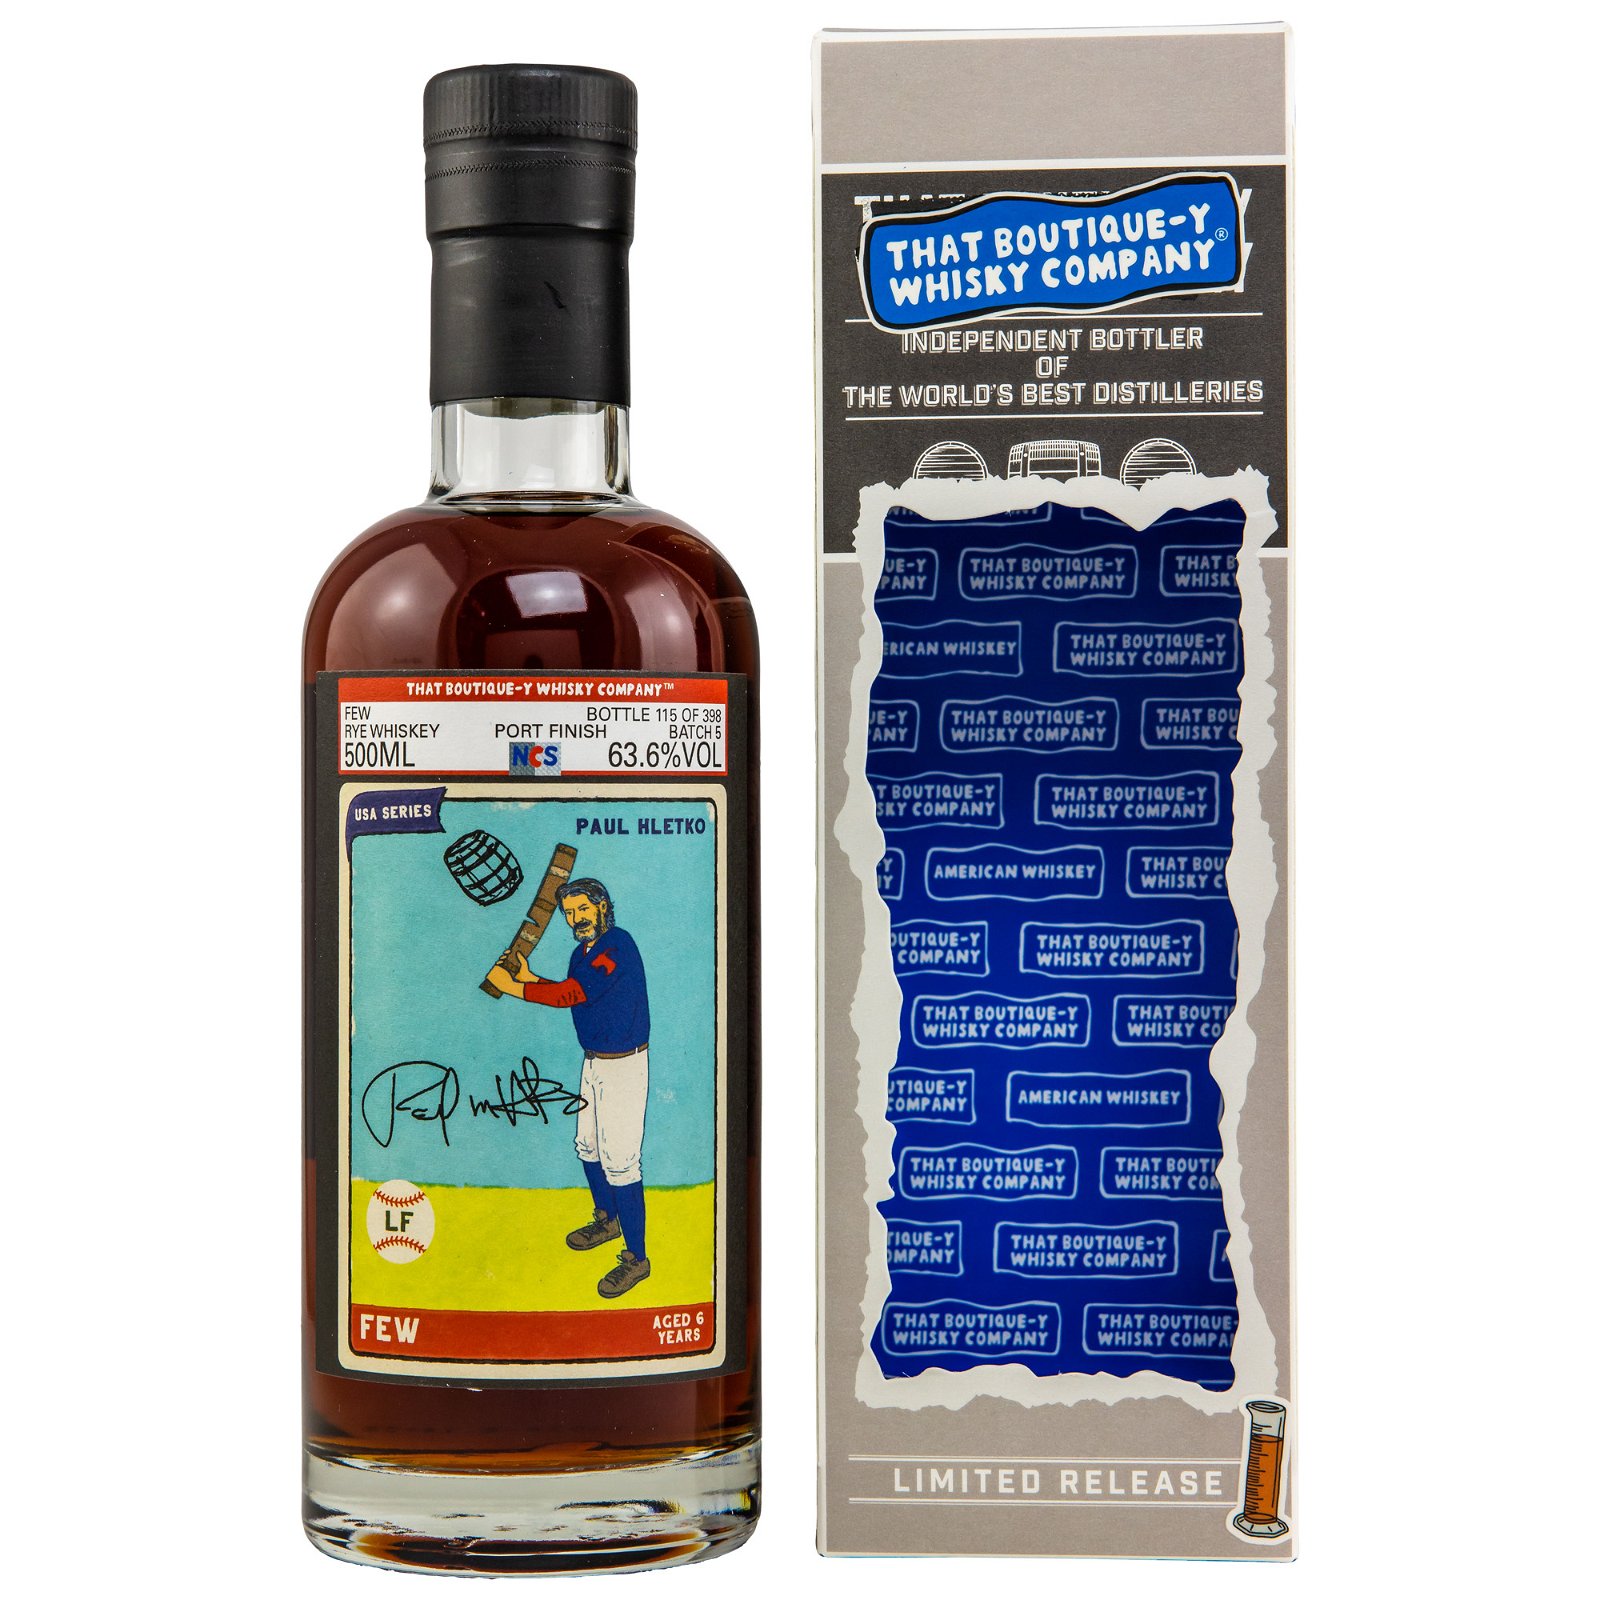 FEW 6 Jahre Batch 5 Port Finish USA Series (That Boutique-y Whisky Company)